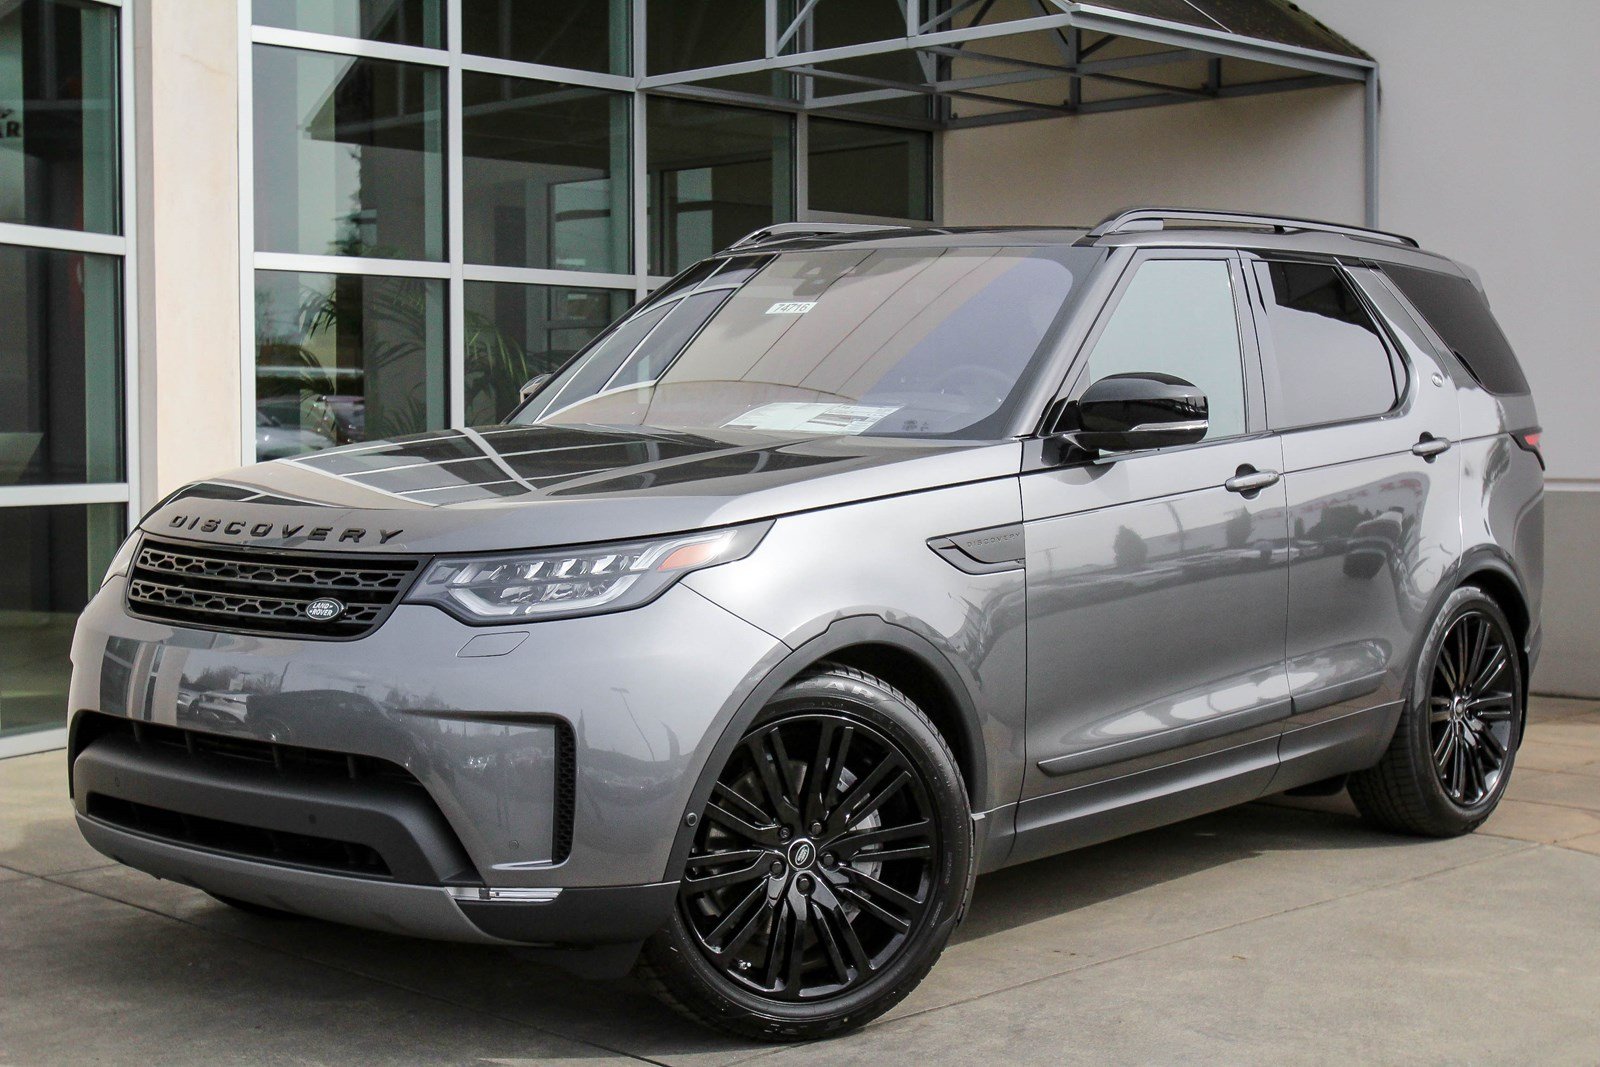 New 2019 Land Rover Discovery Hse Luxury Sport Utility In Bellevue